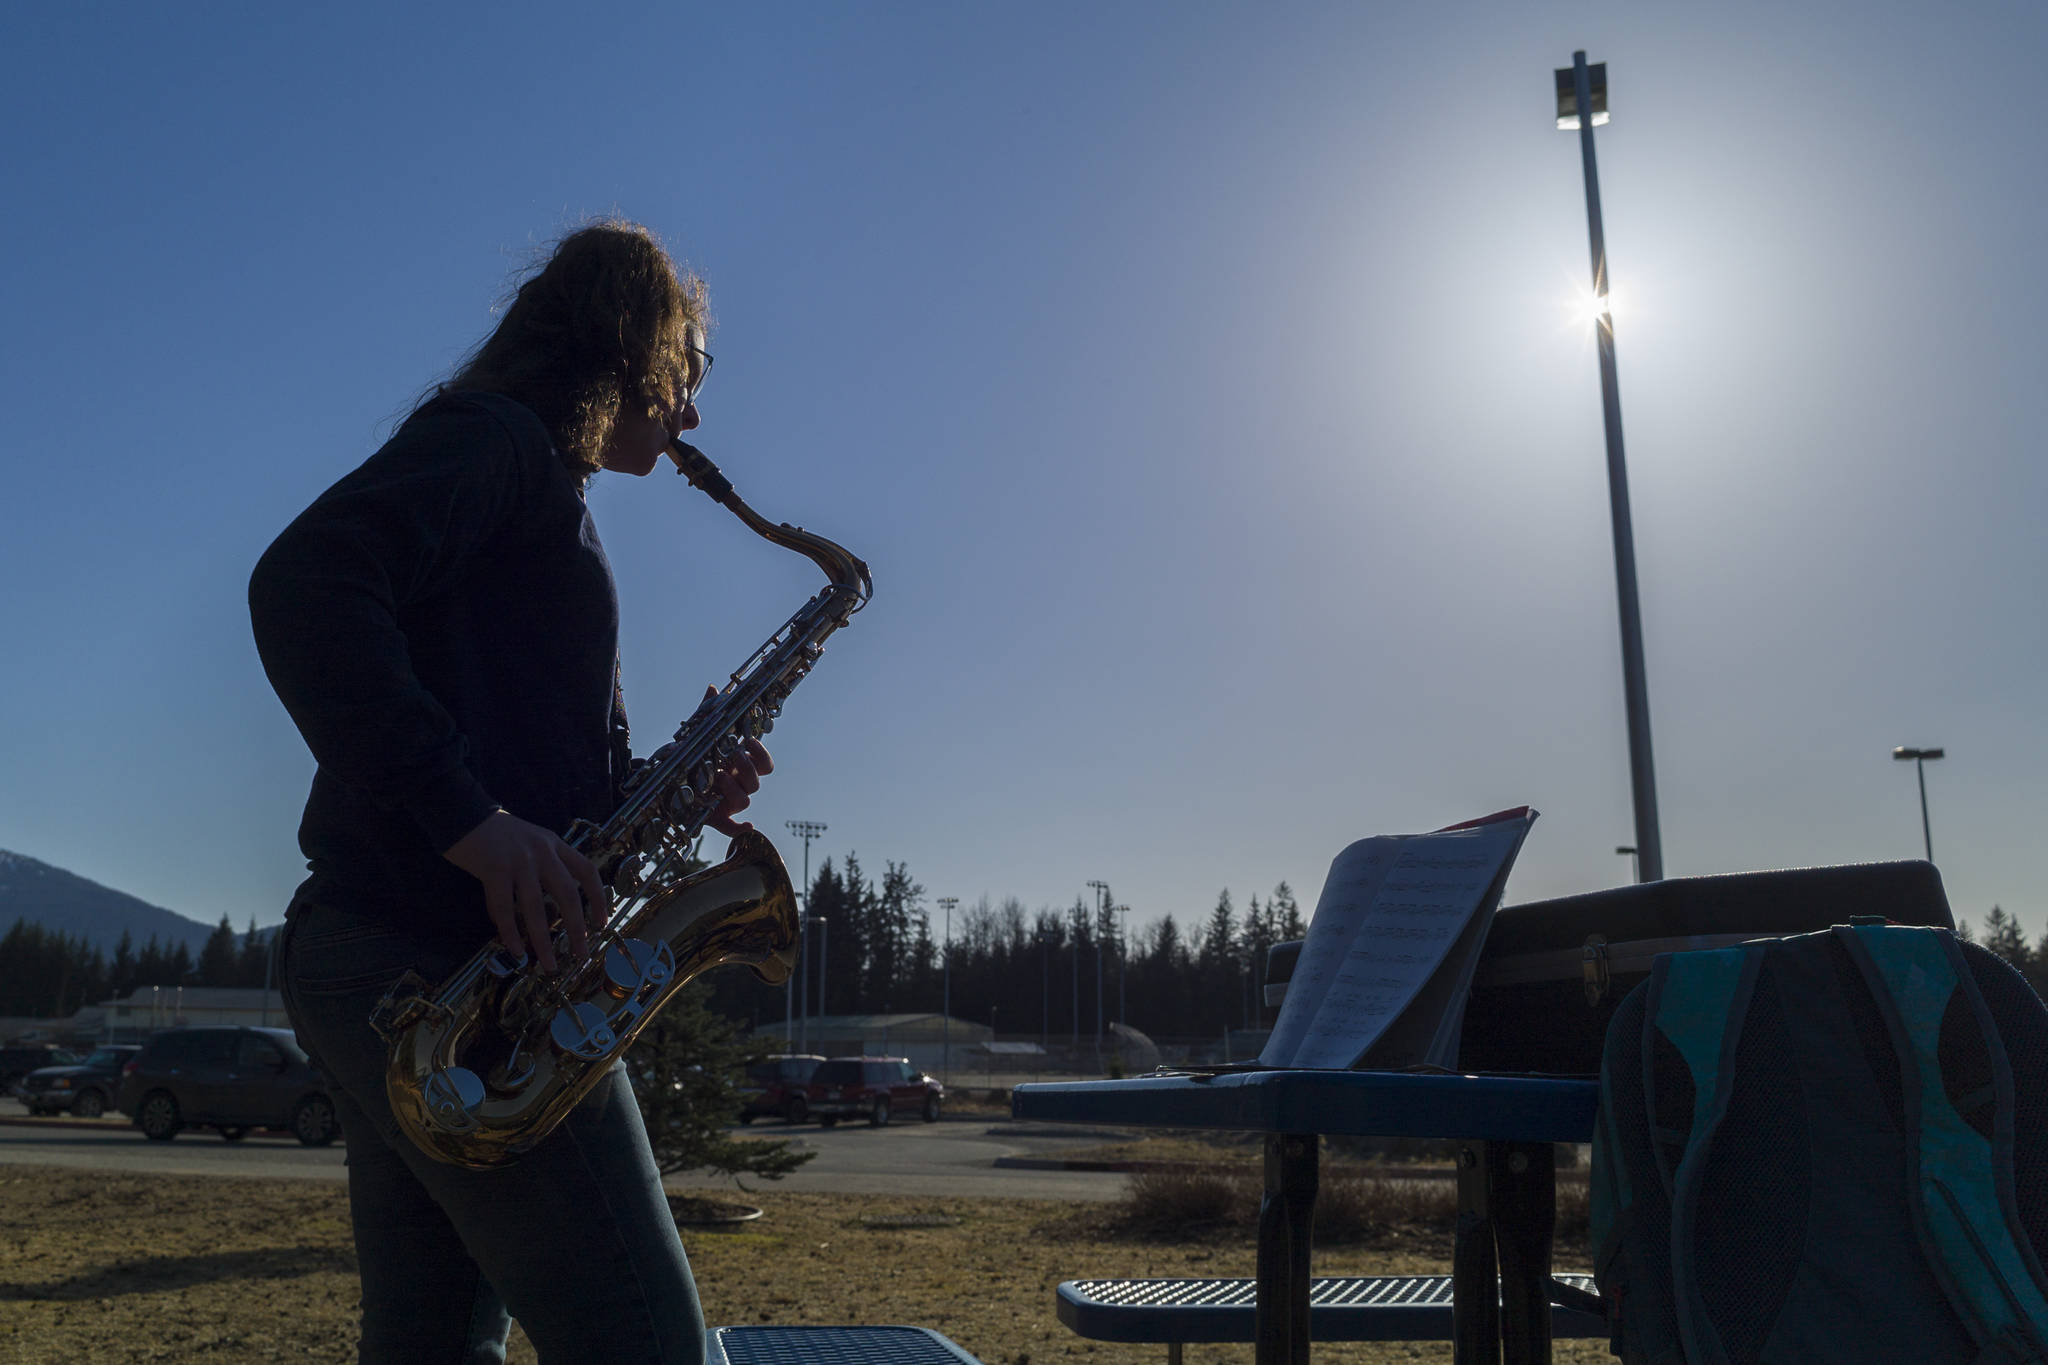 Seveth-grader Allisyn Frazier practices her tenor saxophone outside of the Dimond Park Aquatic Center on Friday, March 29, 2019. (Michael Penn | Juneau Empire)